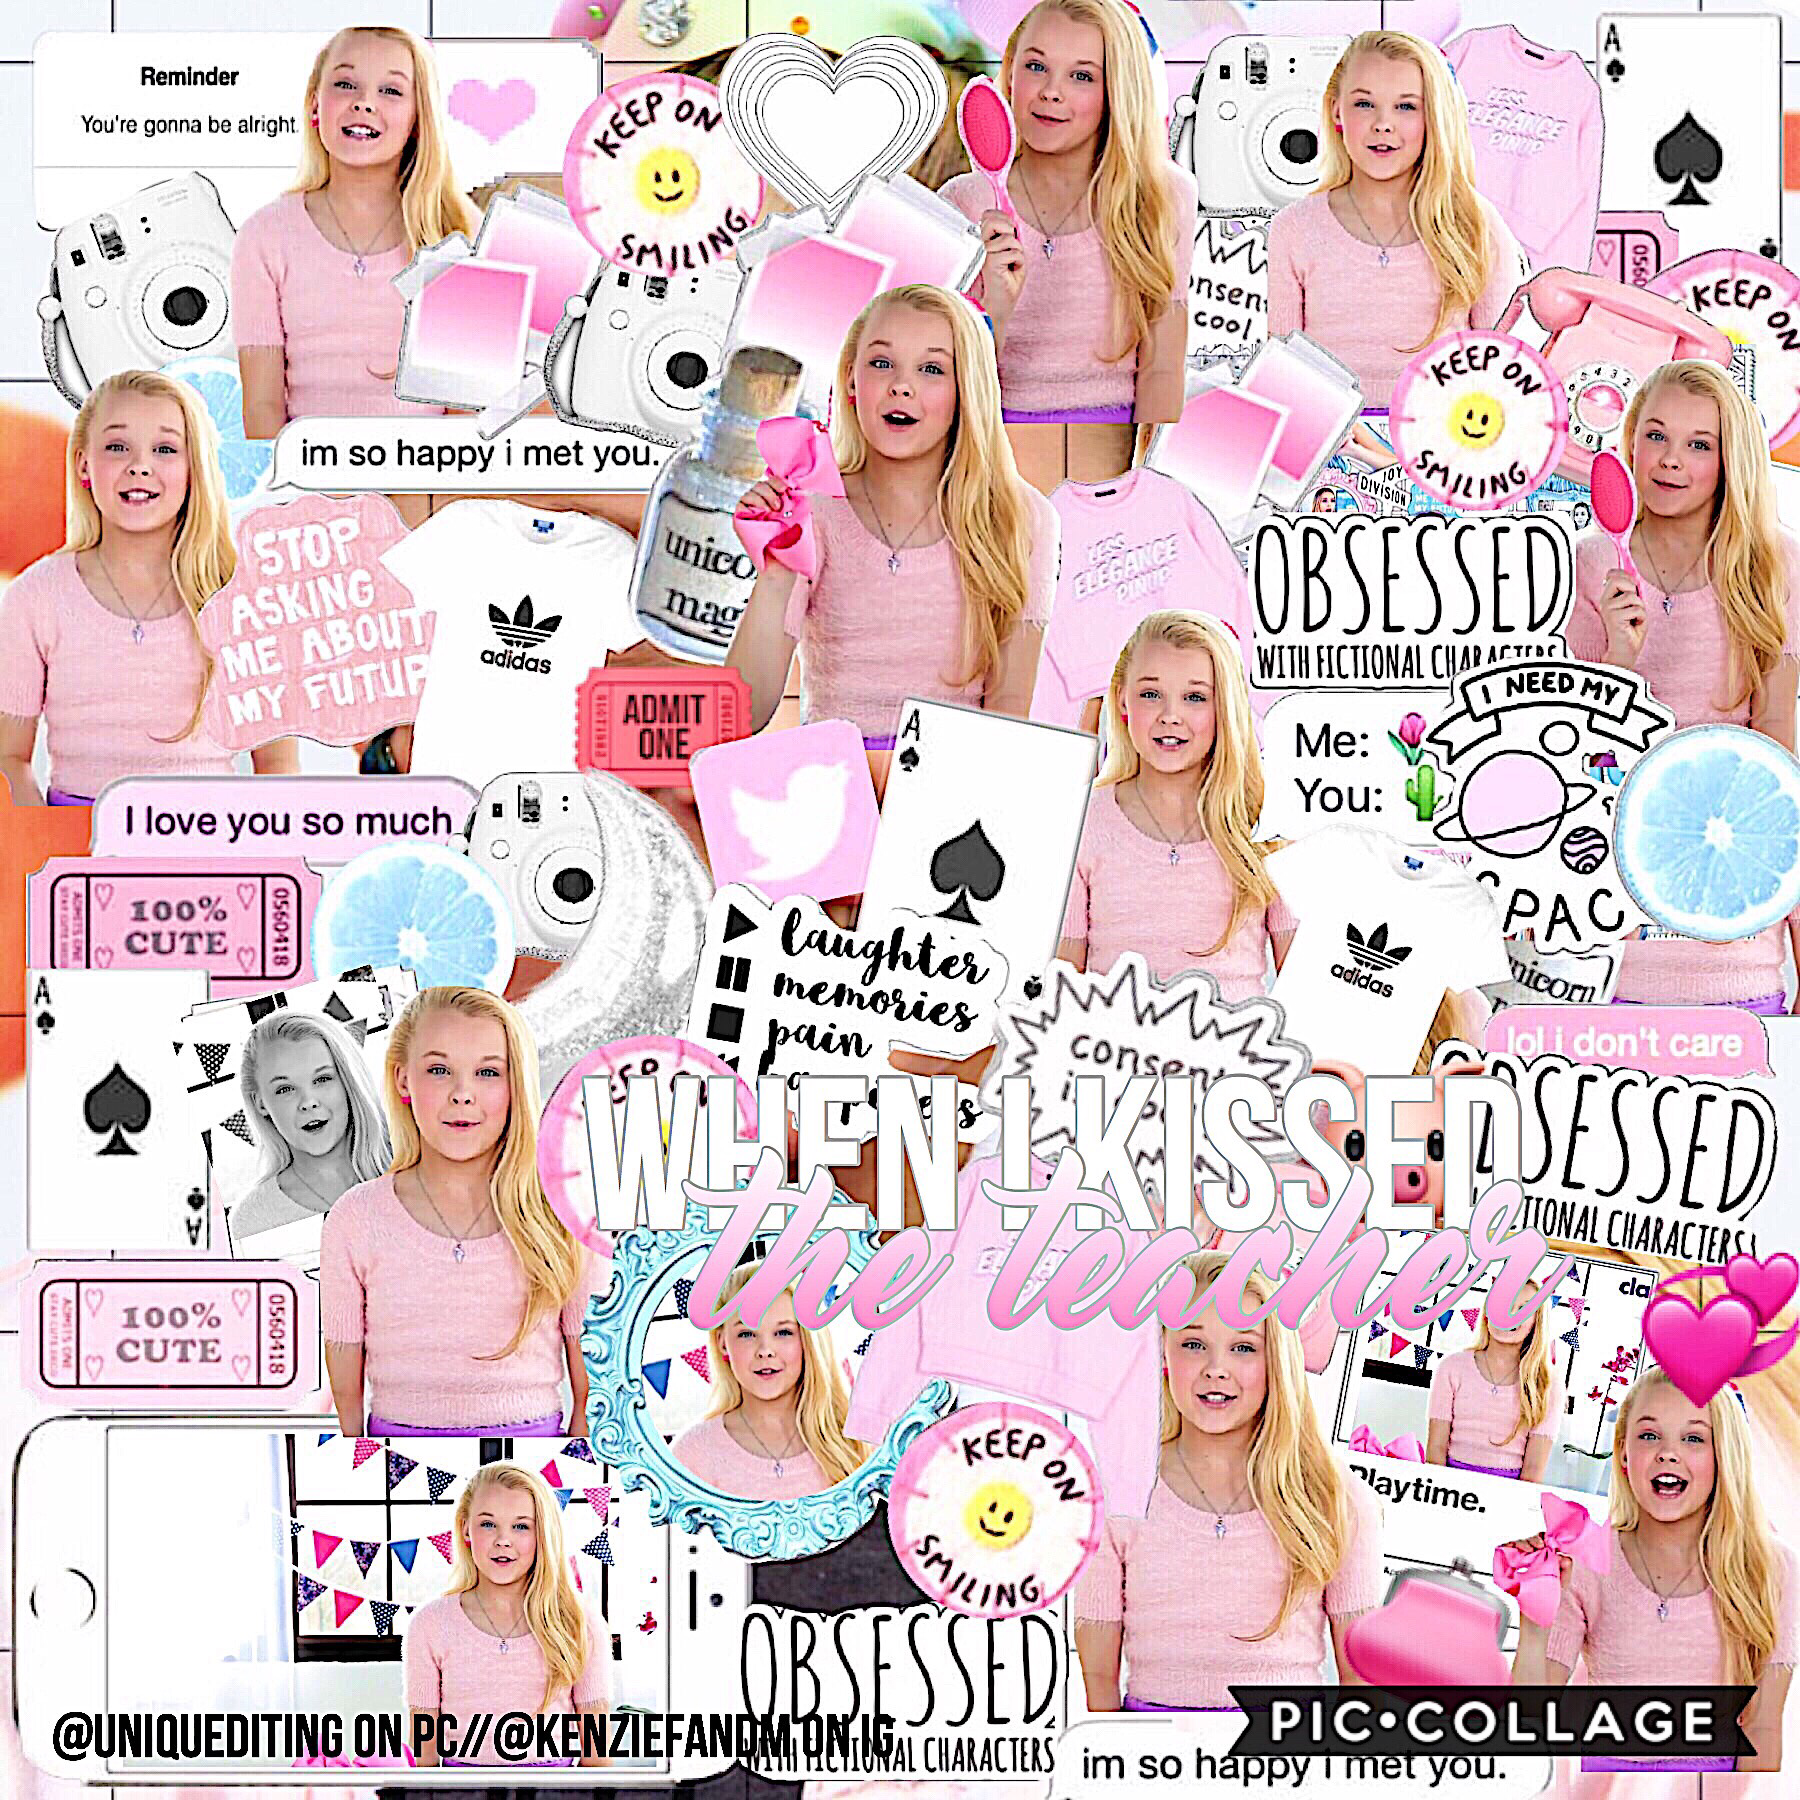 tap 💗
i made this on a plane so don’t judge 😂
qotd:have you started school? if not when do you start school?
aotd:i start school on august 27th 